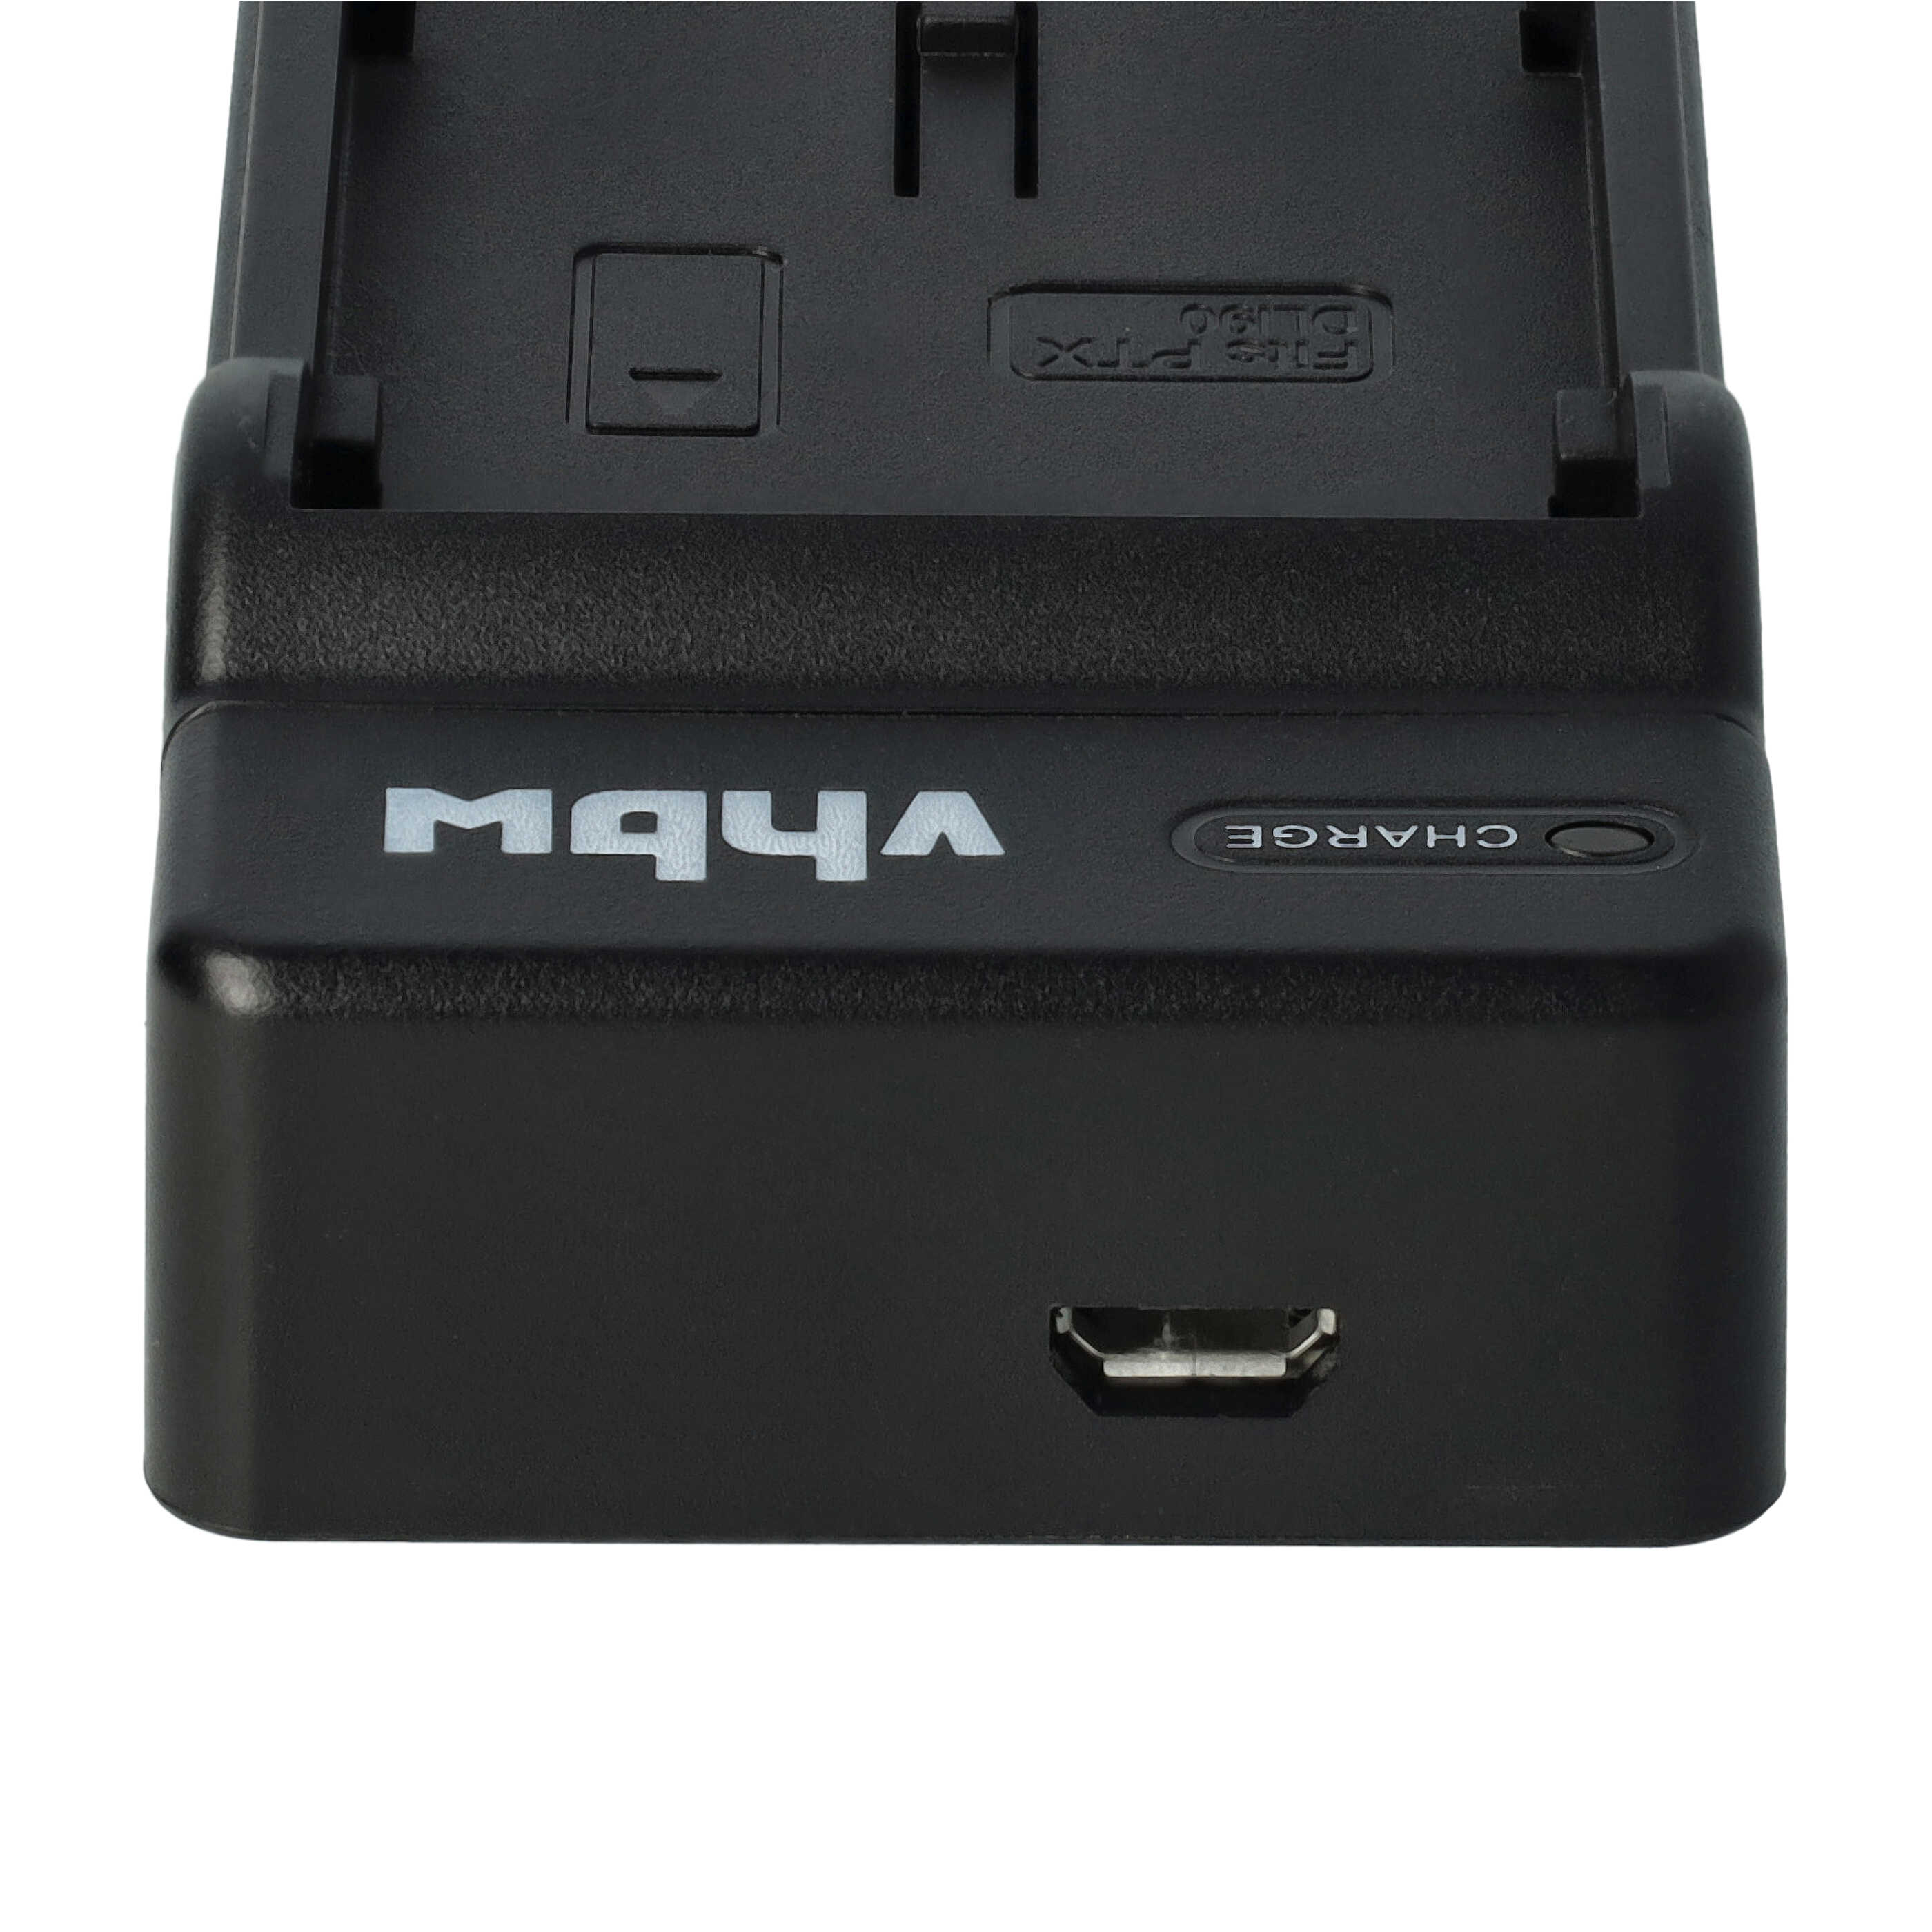 Battery Charger suitable for K-1 Mark II Camera etc. - 0.5 A, 8.4 V